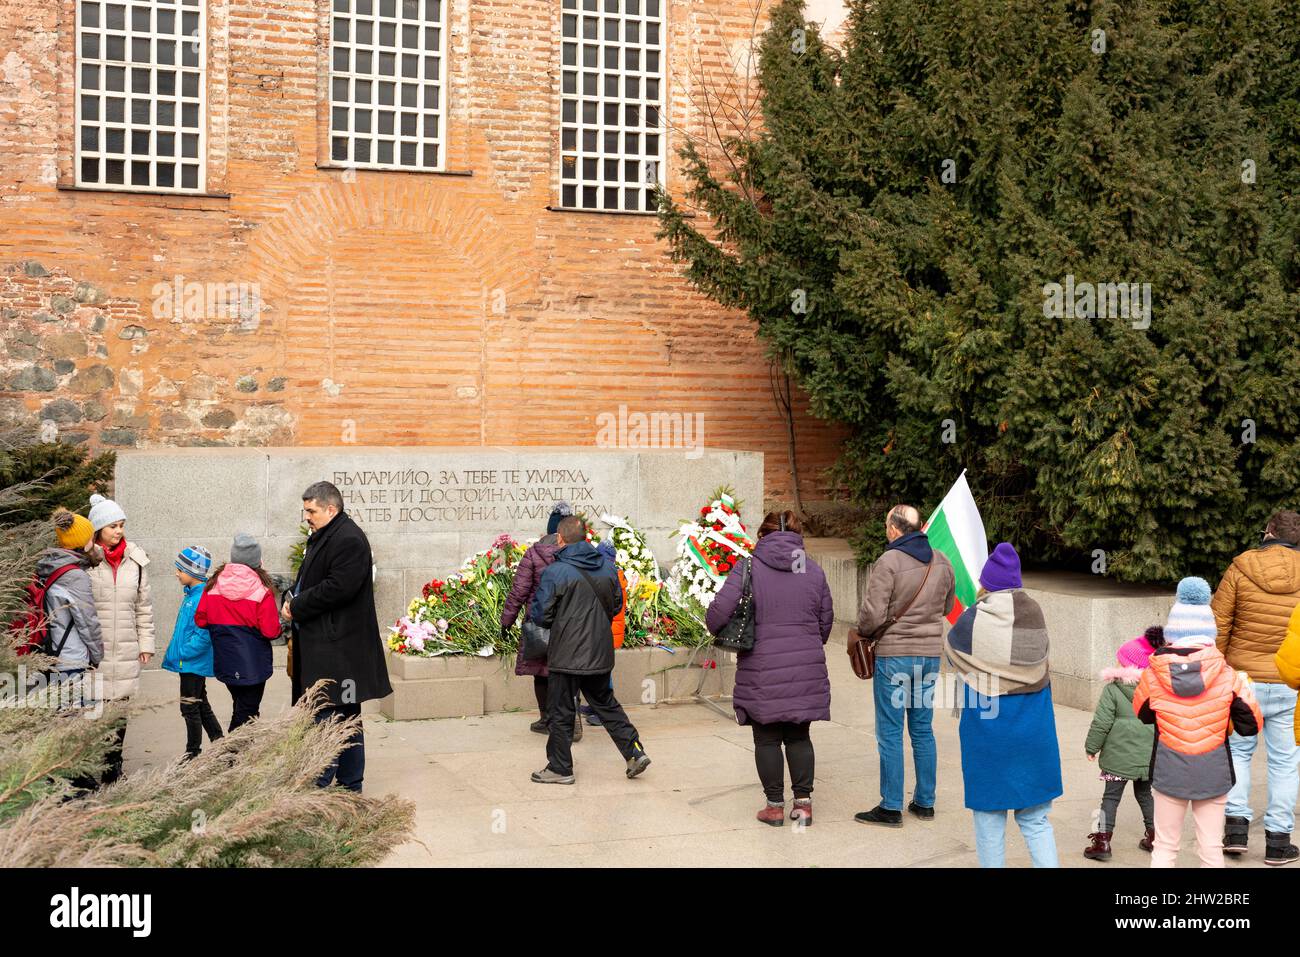 Sofia, Bulgaria. 03 March 2022. People waiting in line outside St. Sophia Church to put flowers at the Monument to the Unknown Warrior in respect and commemoration to the Bulgarian soldiers lost their lives in wars as Bulgarians celebrate the Bulgaria National Day. Stock Photo